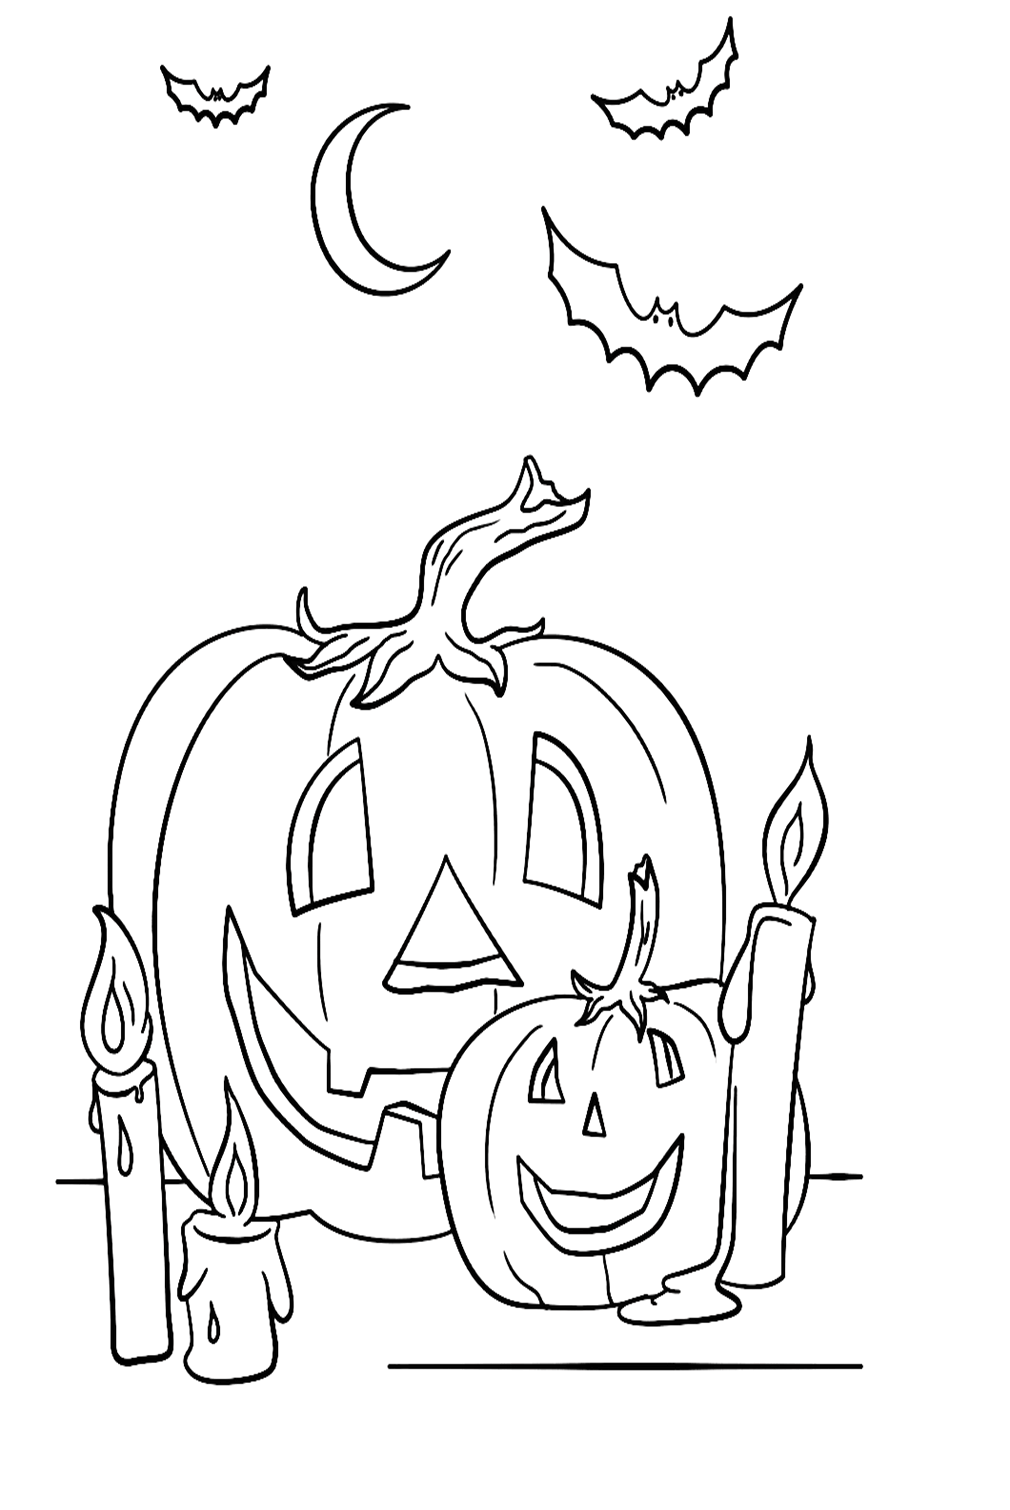 Halloween Scene with Pumpkins, Candles and Bats Coloring Pages